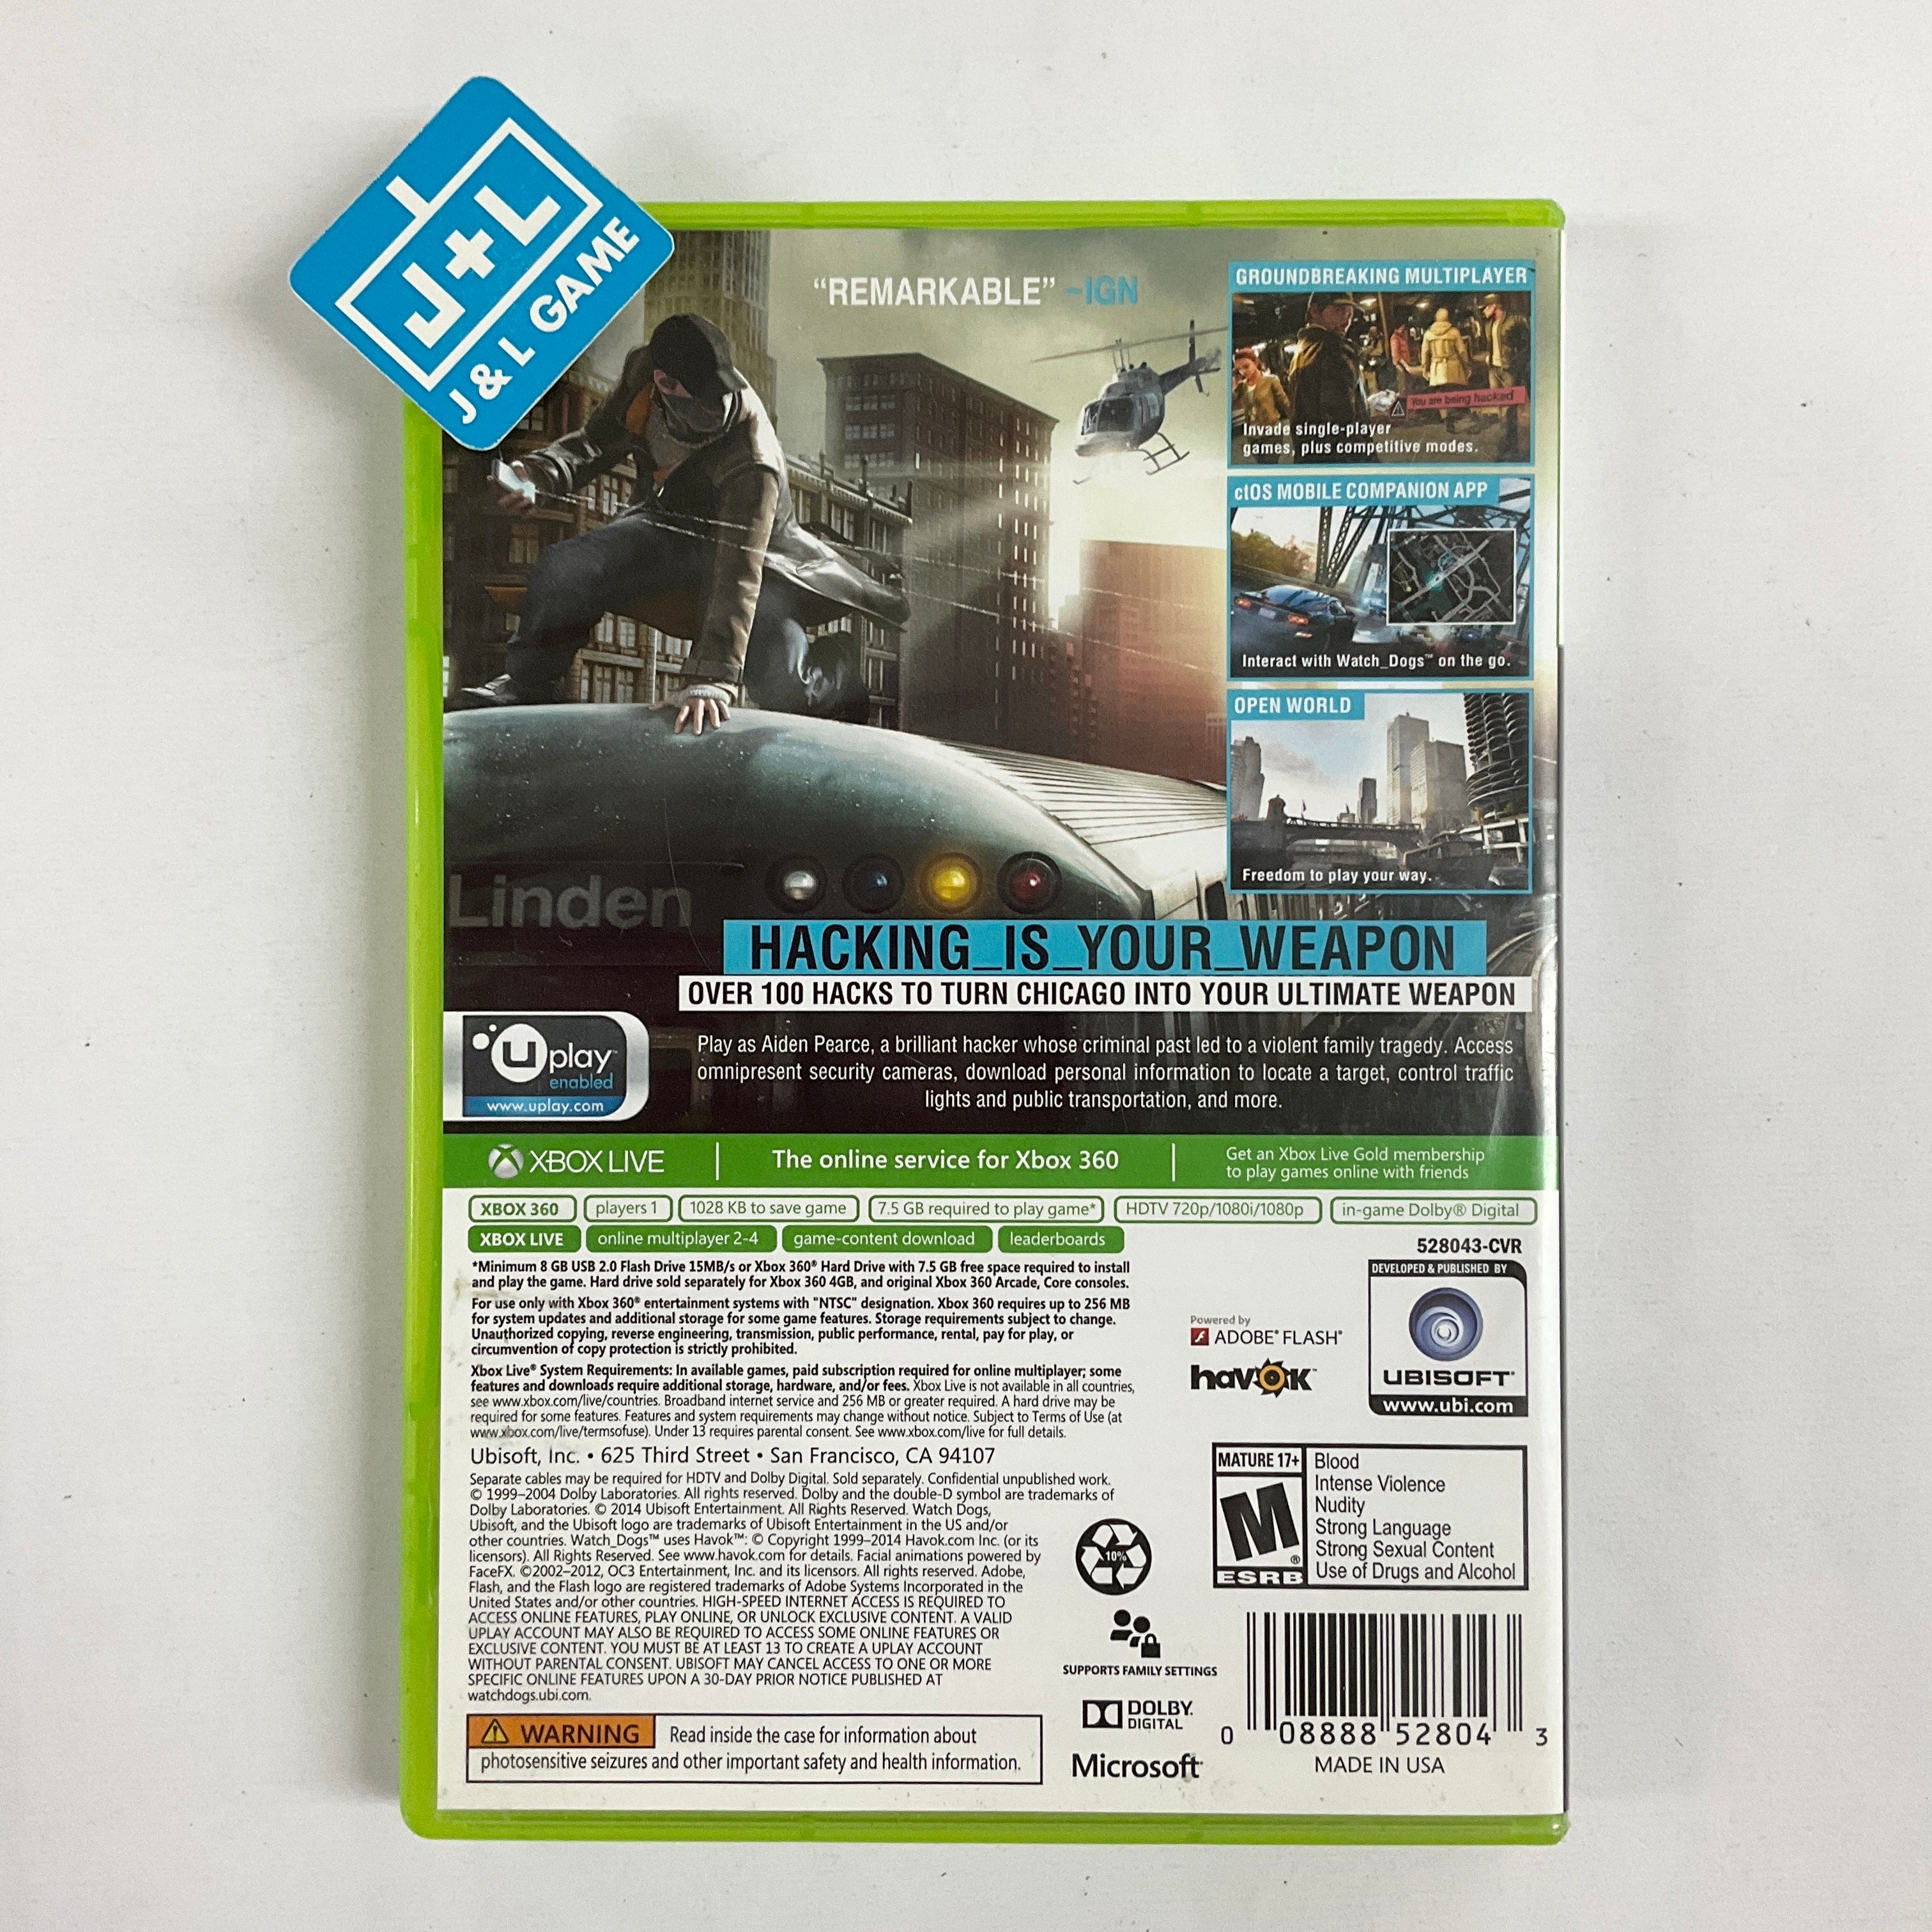 Watch Dogs - Xbox 360 [Pre-Owned] Video Games Ubisoft   